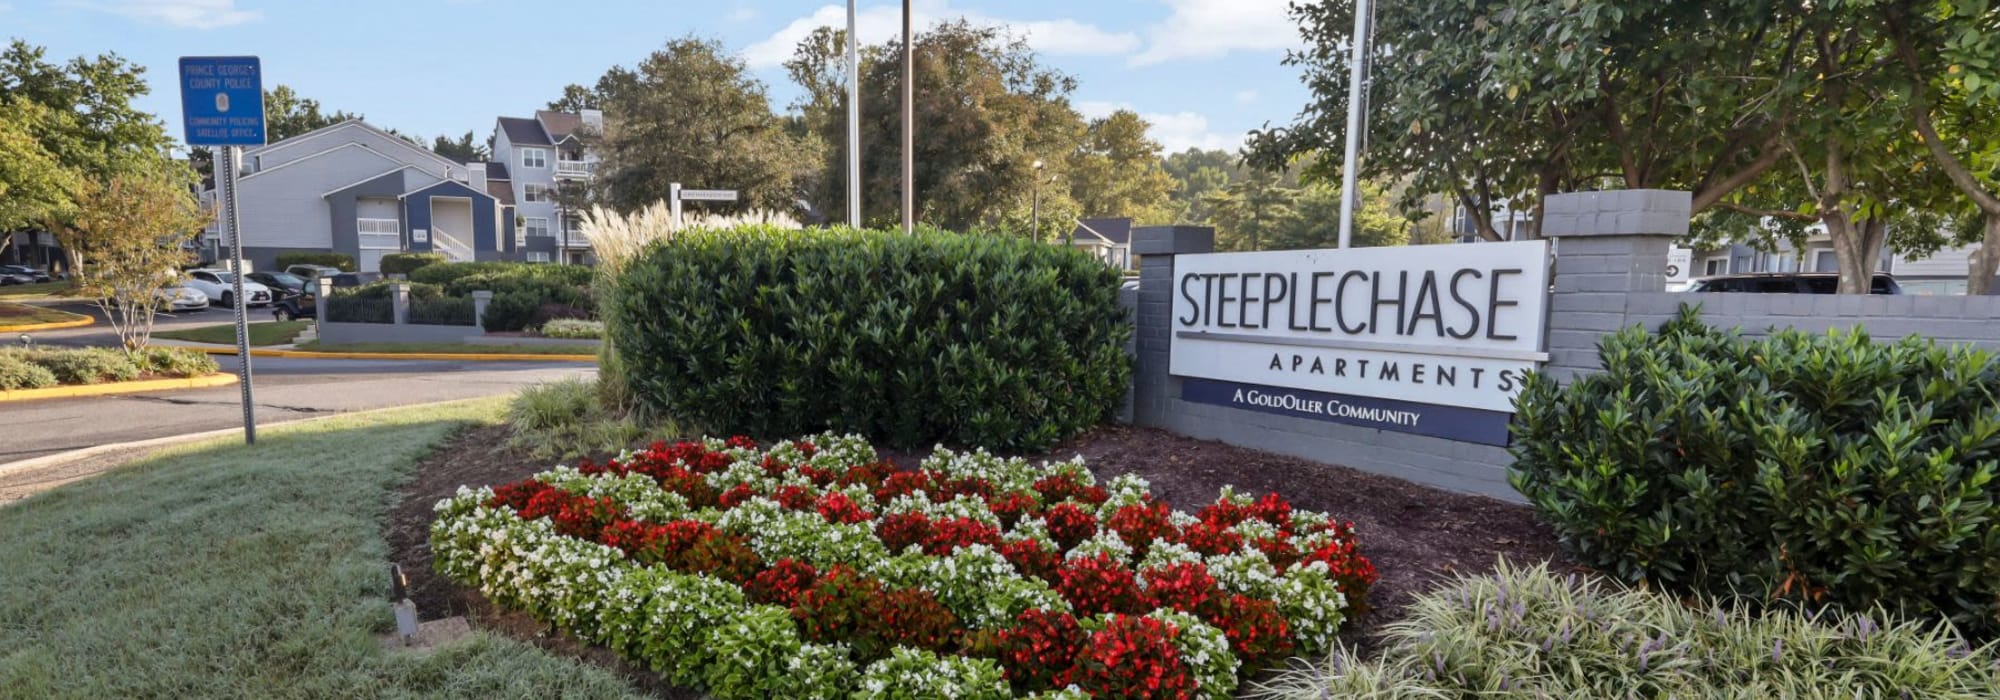 Schedule a Tour at Steeplechase Apartments in Largo, Maryland